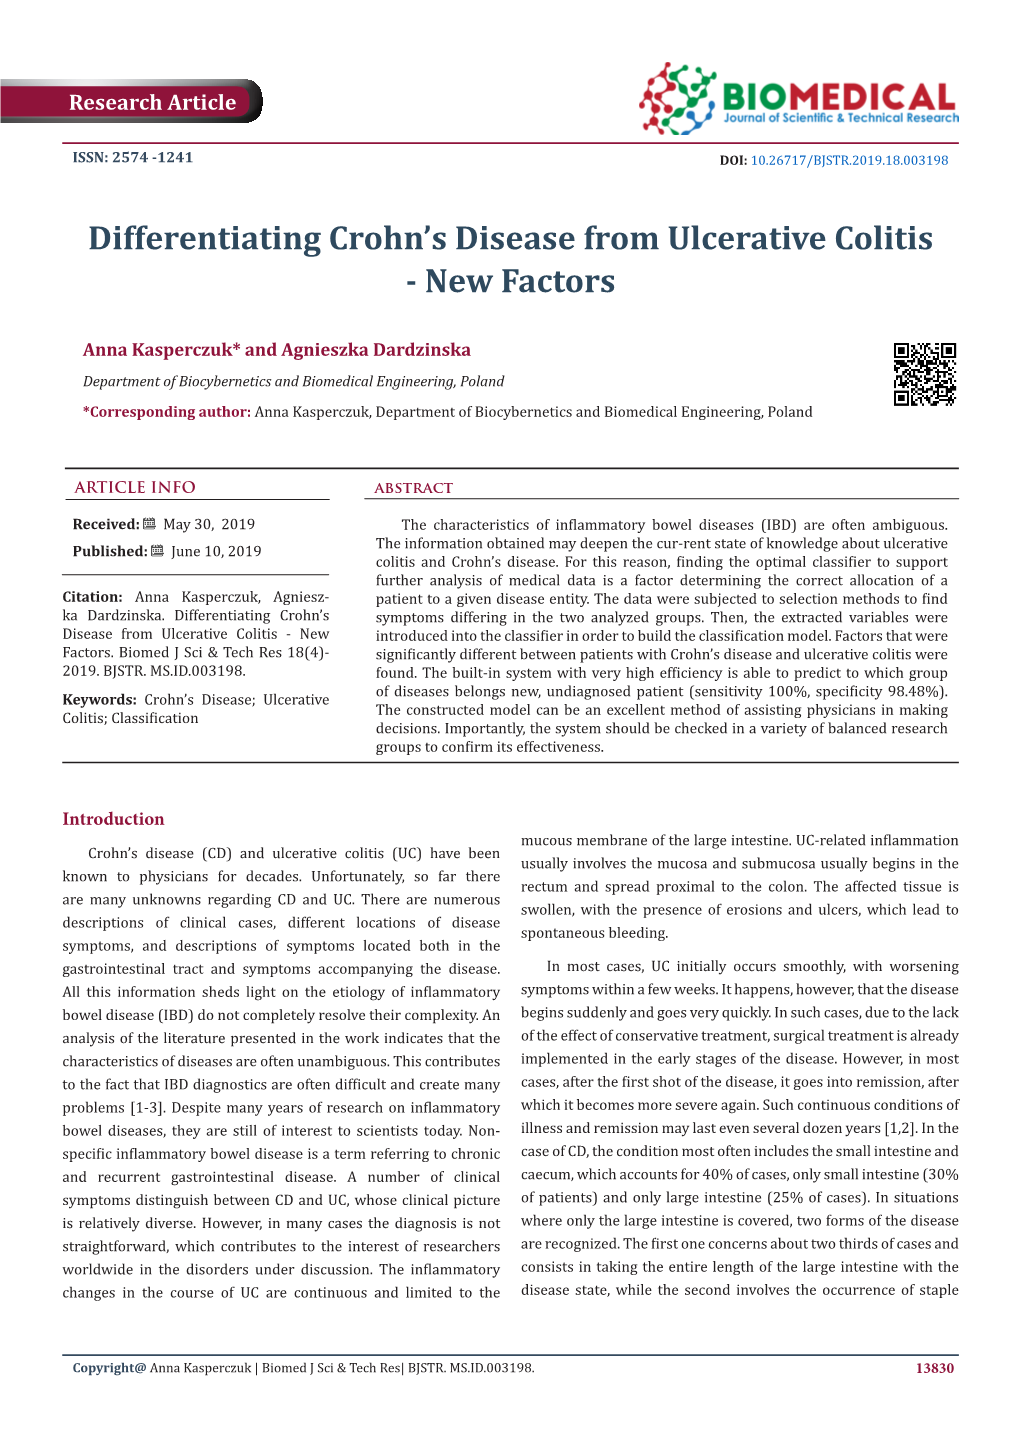 Differentiating Crohn's Disease from Ulcerative Colitis